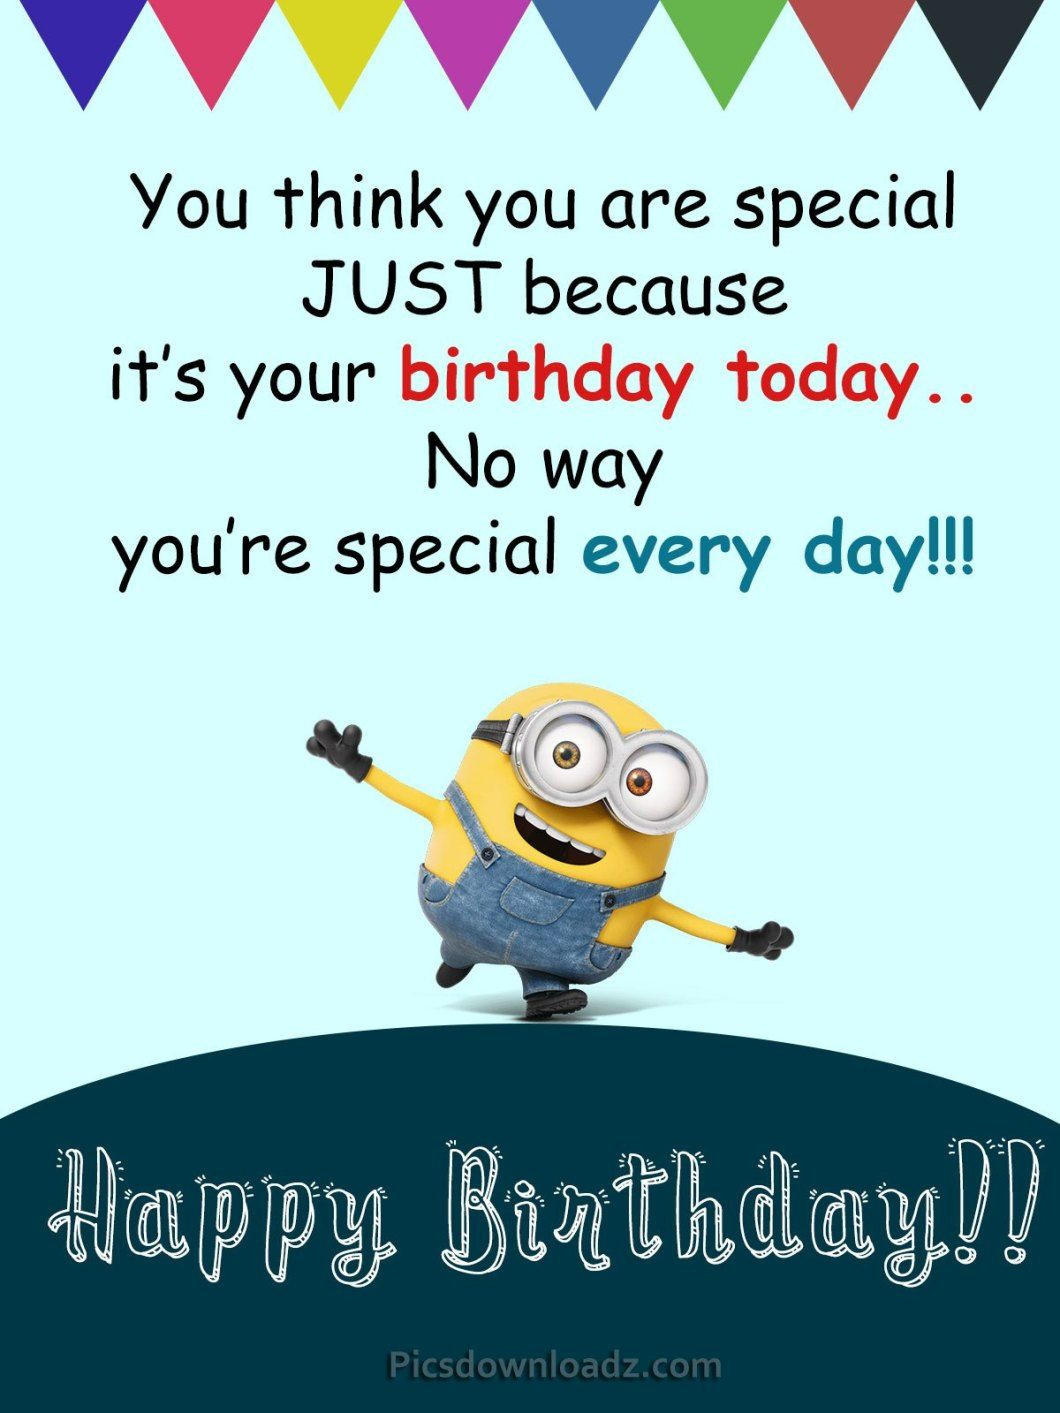 Happy Birthday Wishes For Best Friend Funny
 Funny Happy Birthday Wishes for Best Friend – Happy